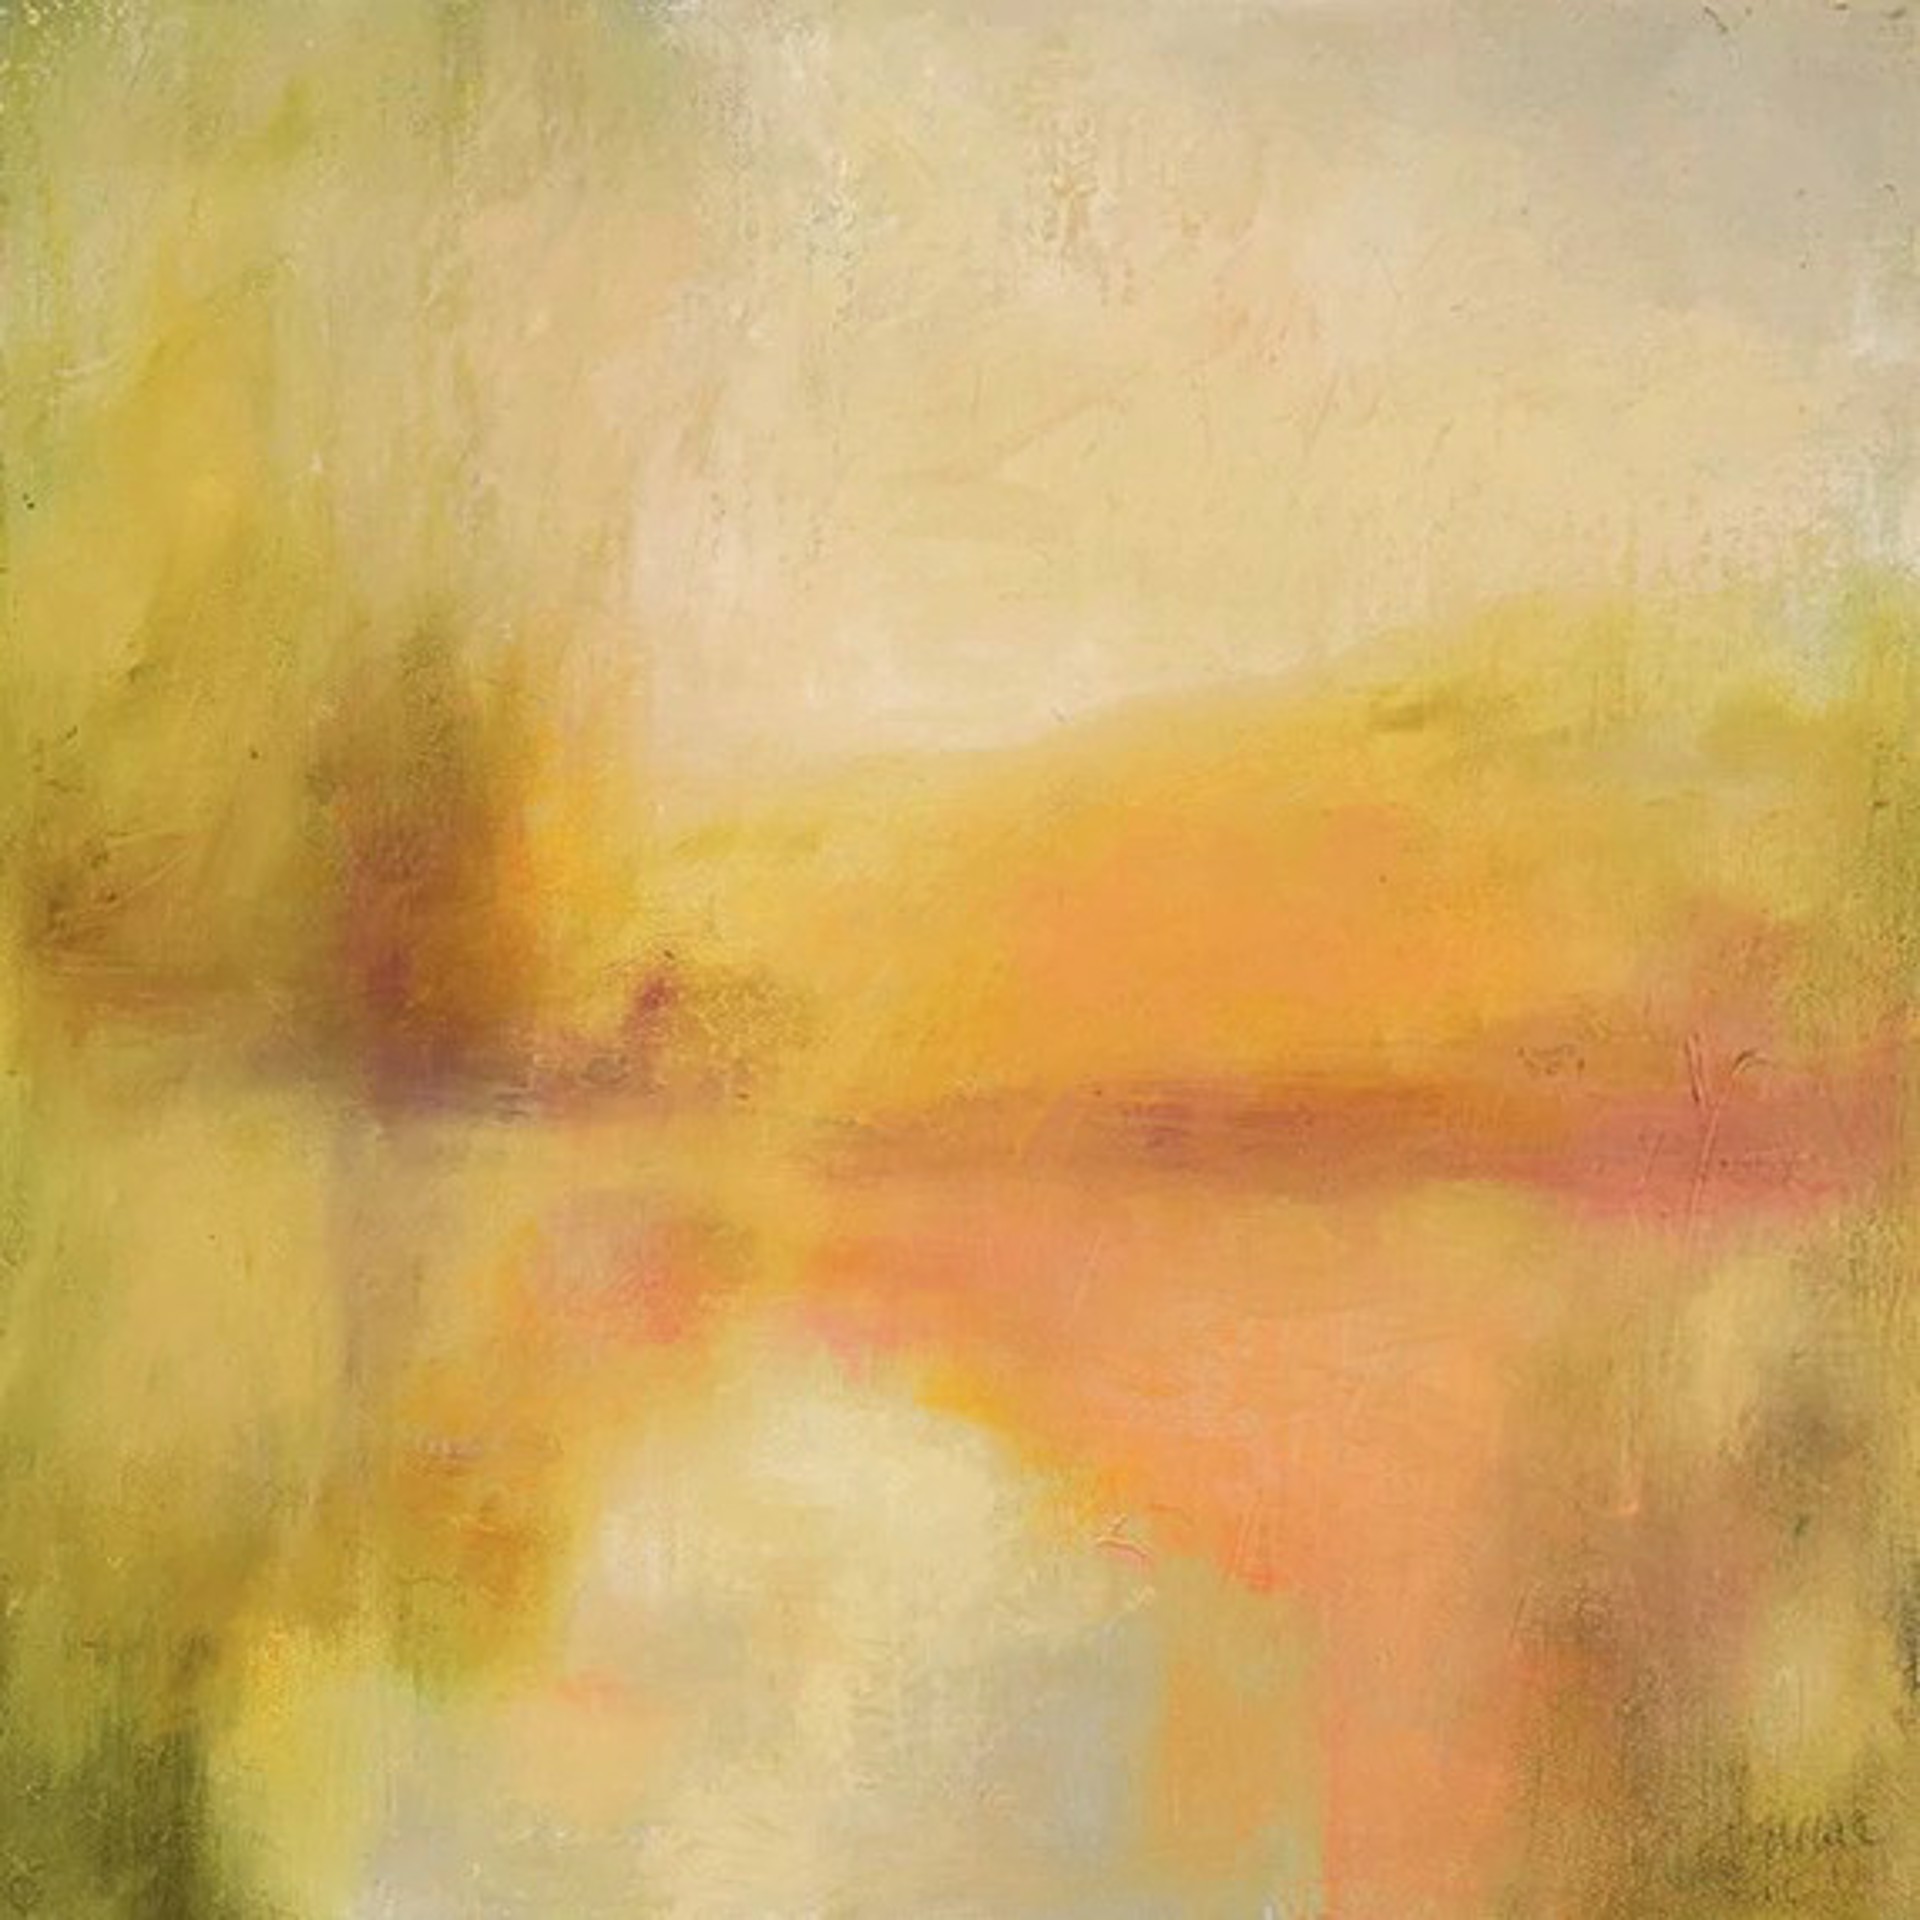 Ethereal Spaces IV by Teresa McCue